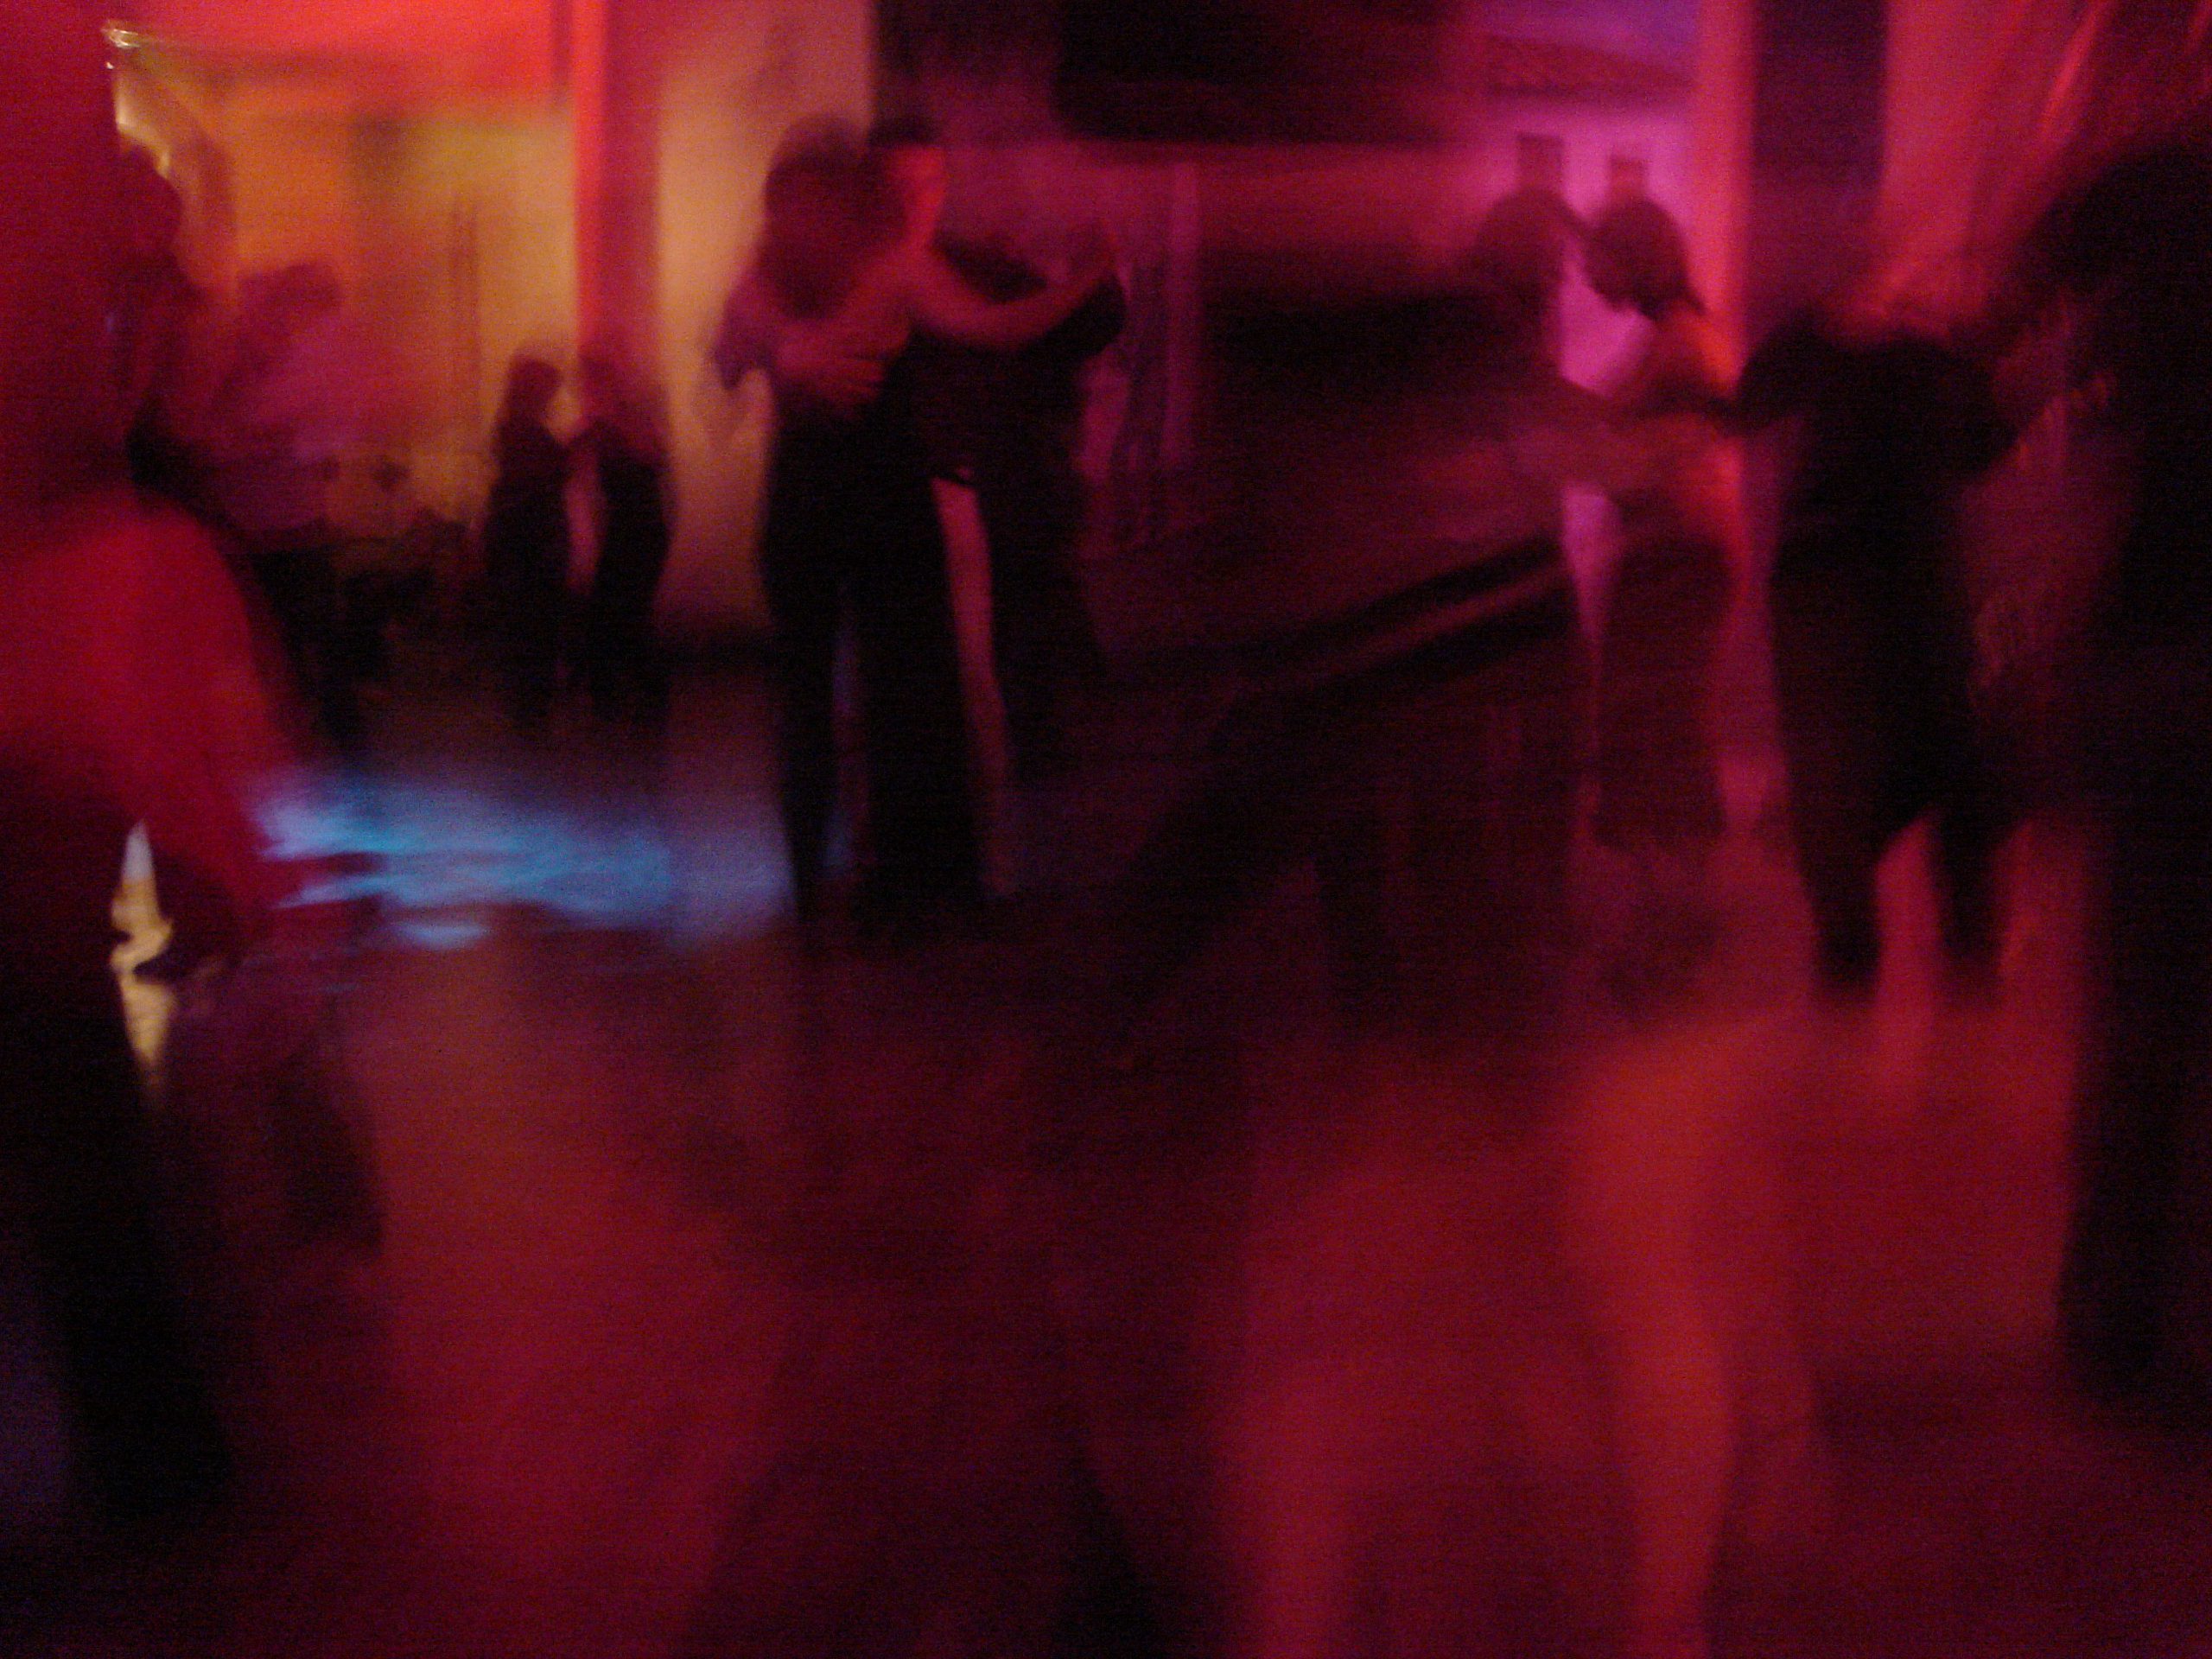 Milonga Mood – Dancing Argentine Tango at Corrientes, Russell Square, London | May 2006 | Sony Cyber-shot DSC-T7